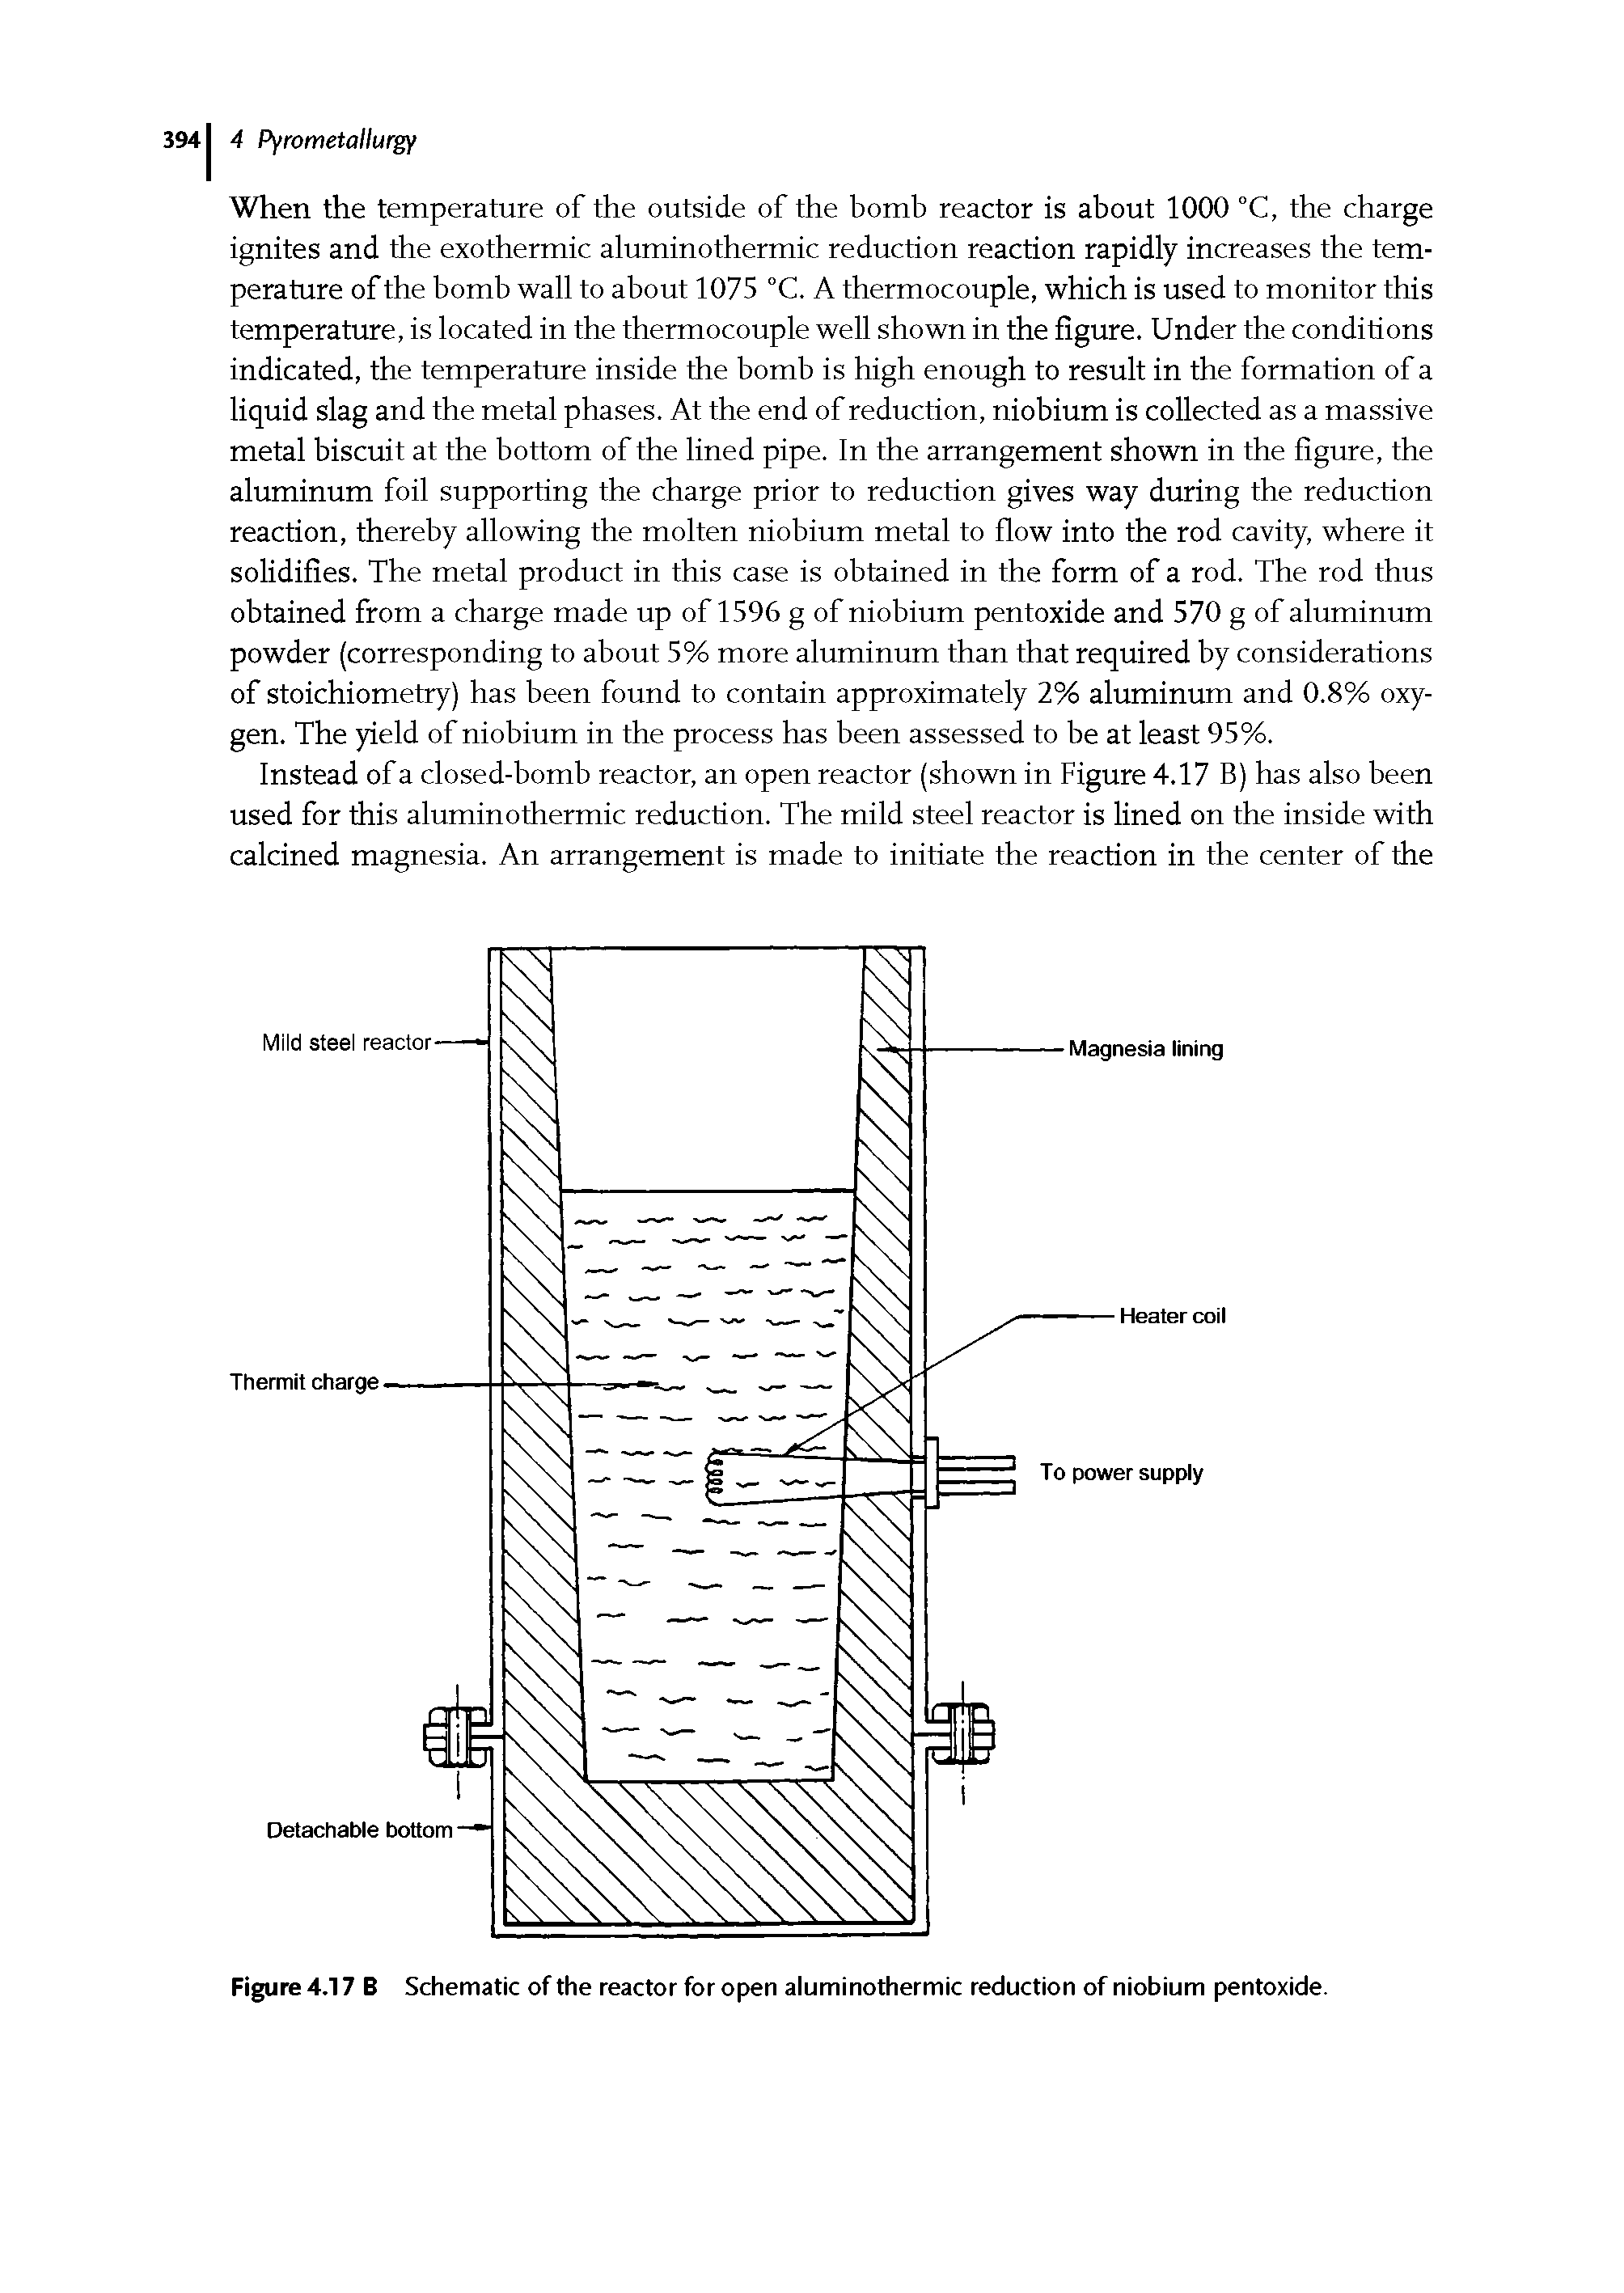 Figure 4.17 B Schematic of the reactor for open aluminothermic reduction of niobium pentoxide.